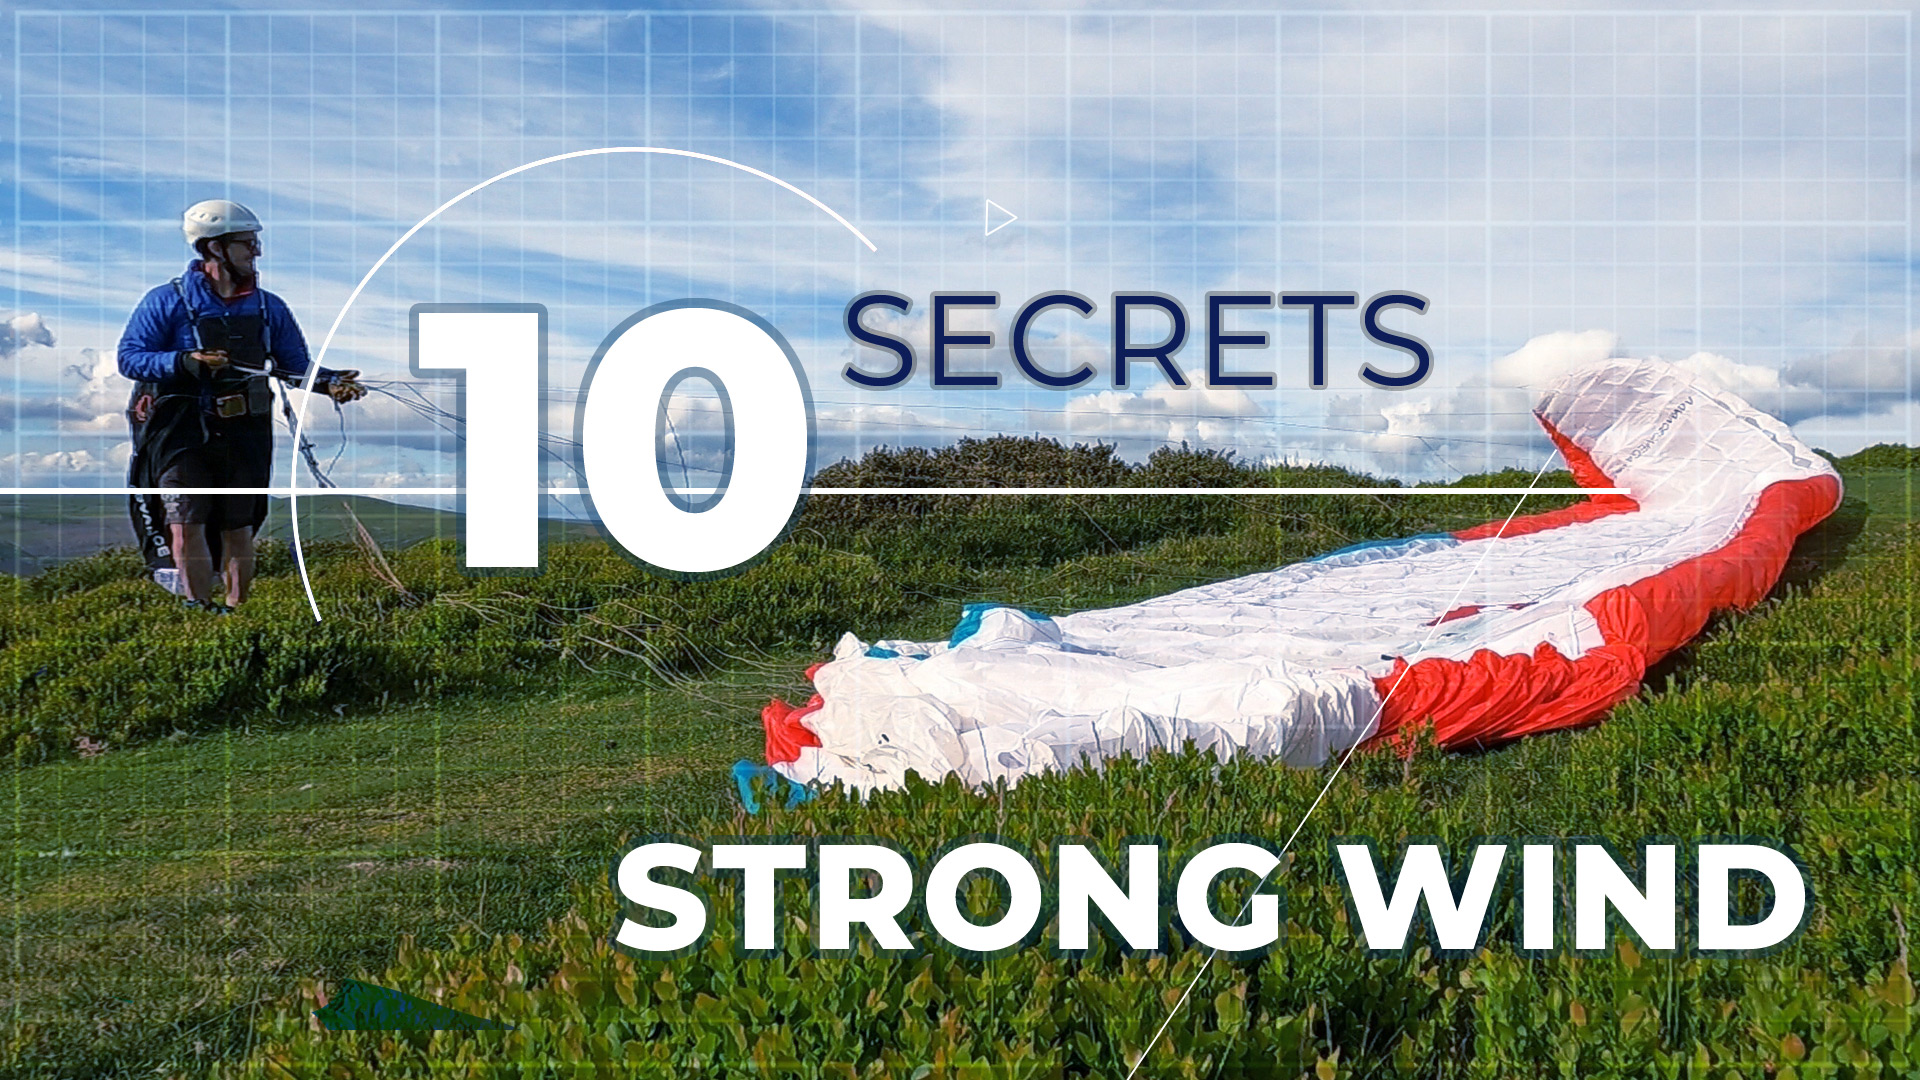 Secrets of paragliding in strong wind